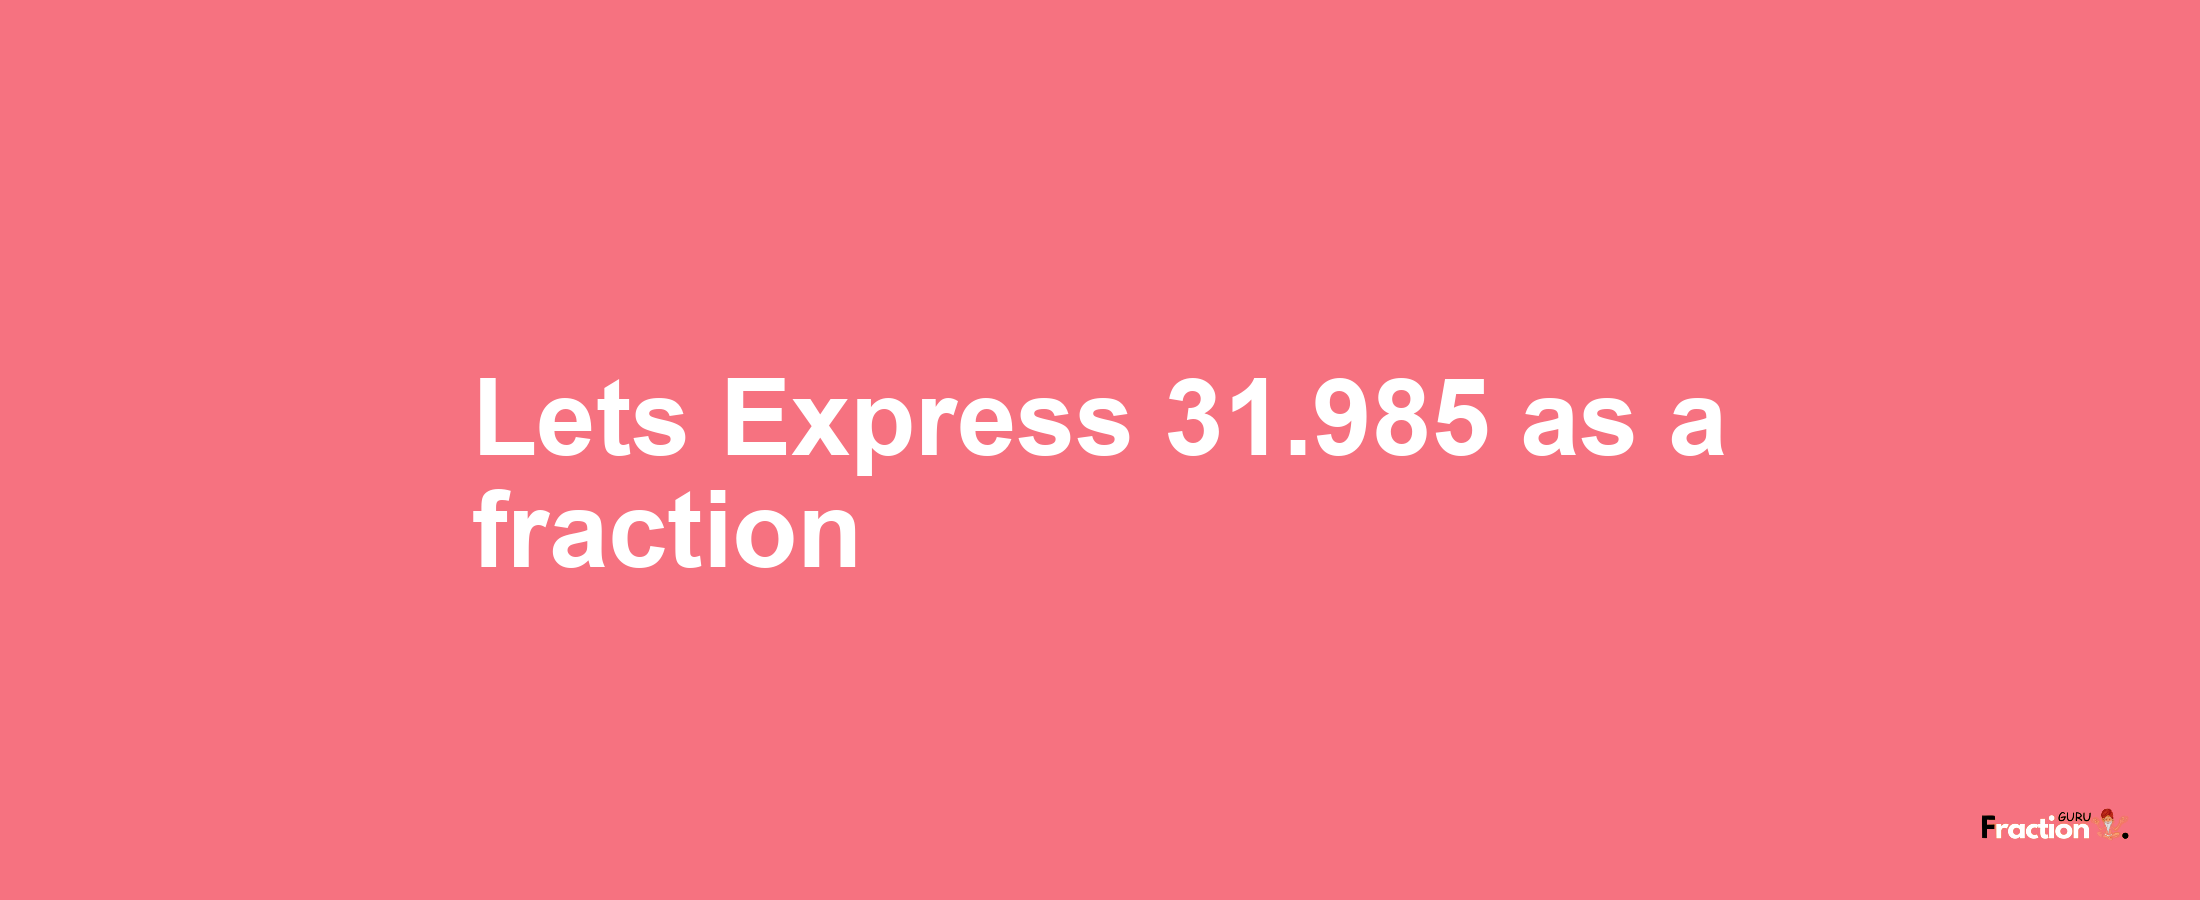 Lets Express 31.985 as afraction